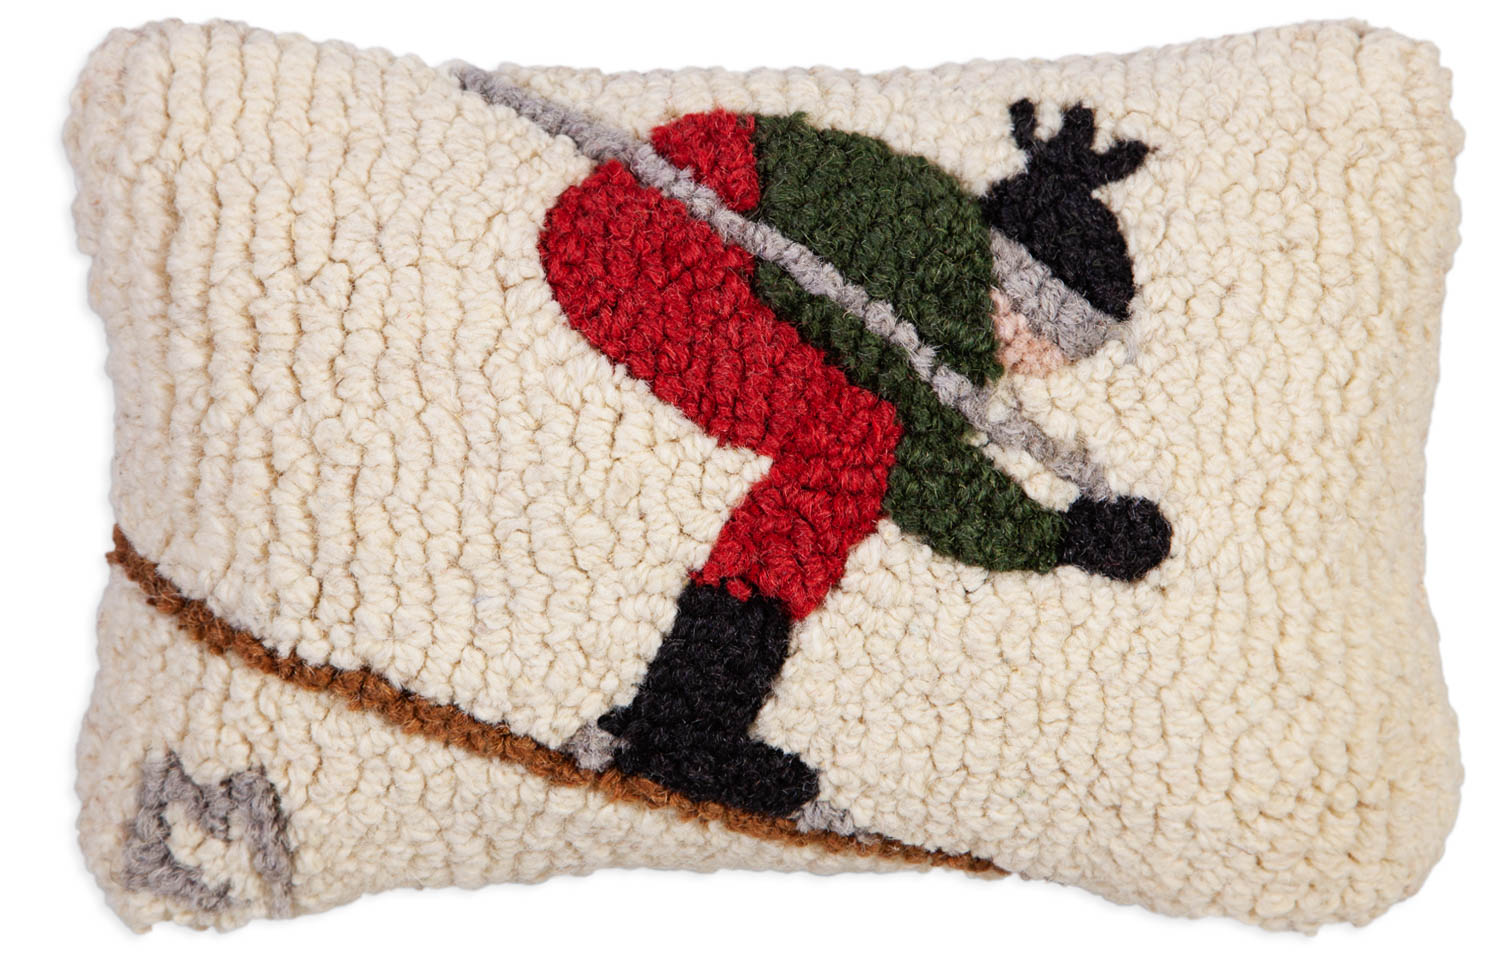 Downhill skier hooked pillow.